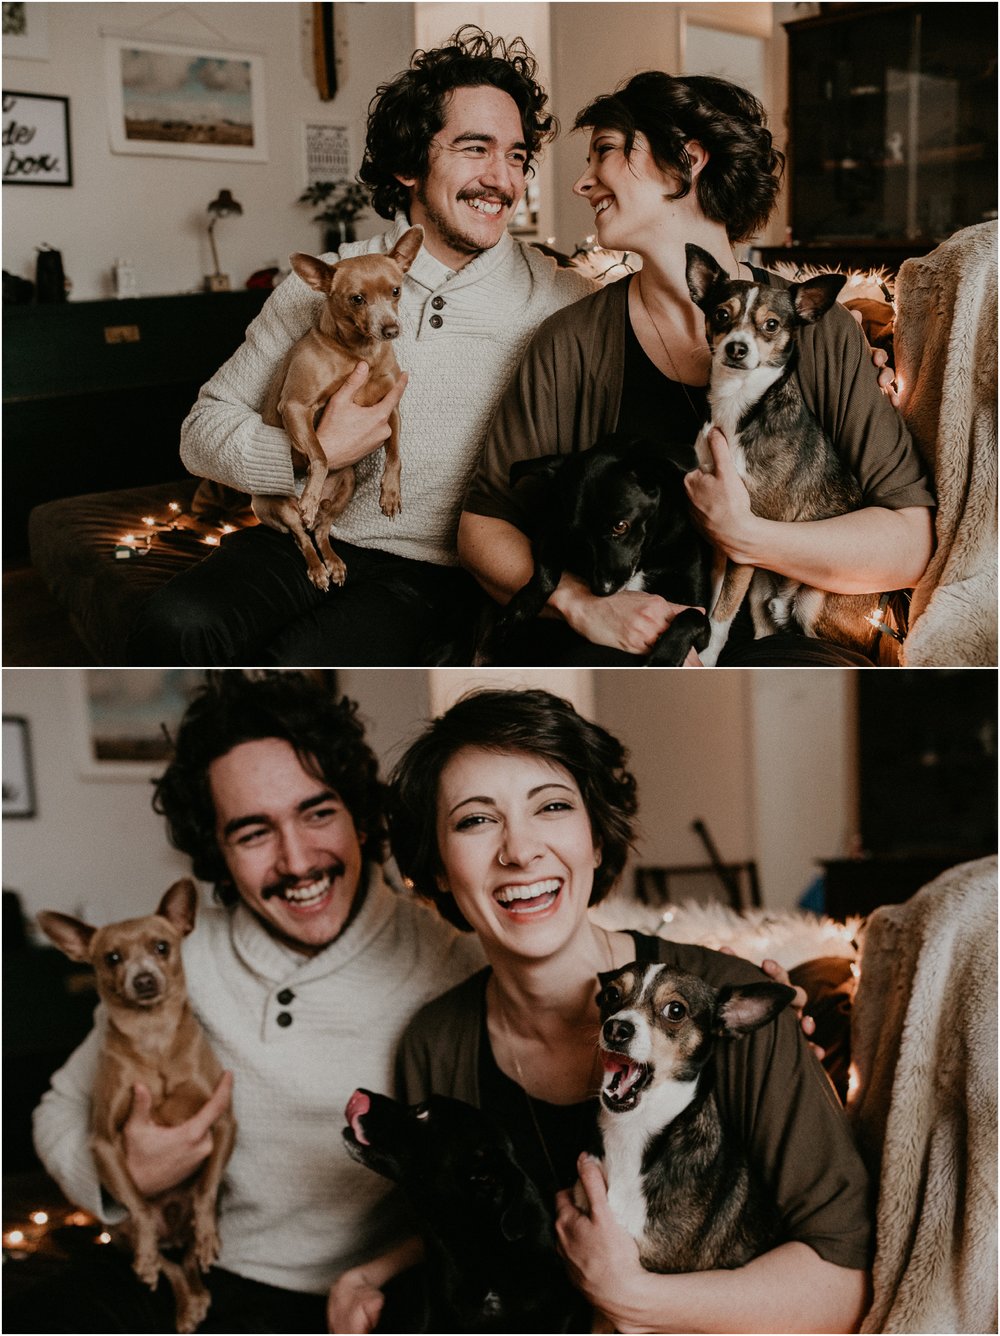 Boise Engagement Wedding Photographer Lifestyle Couples Session In home Dogs Christmas Winter